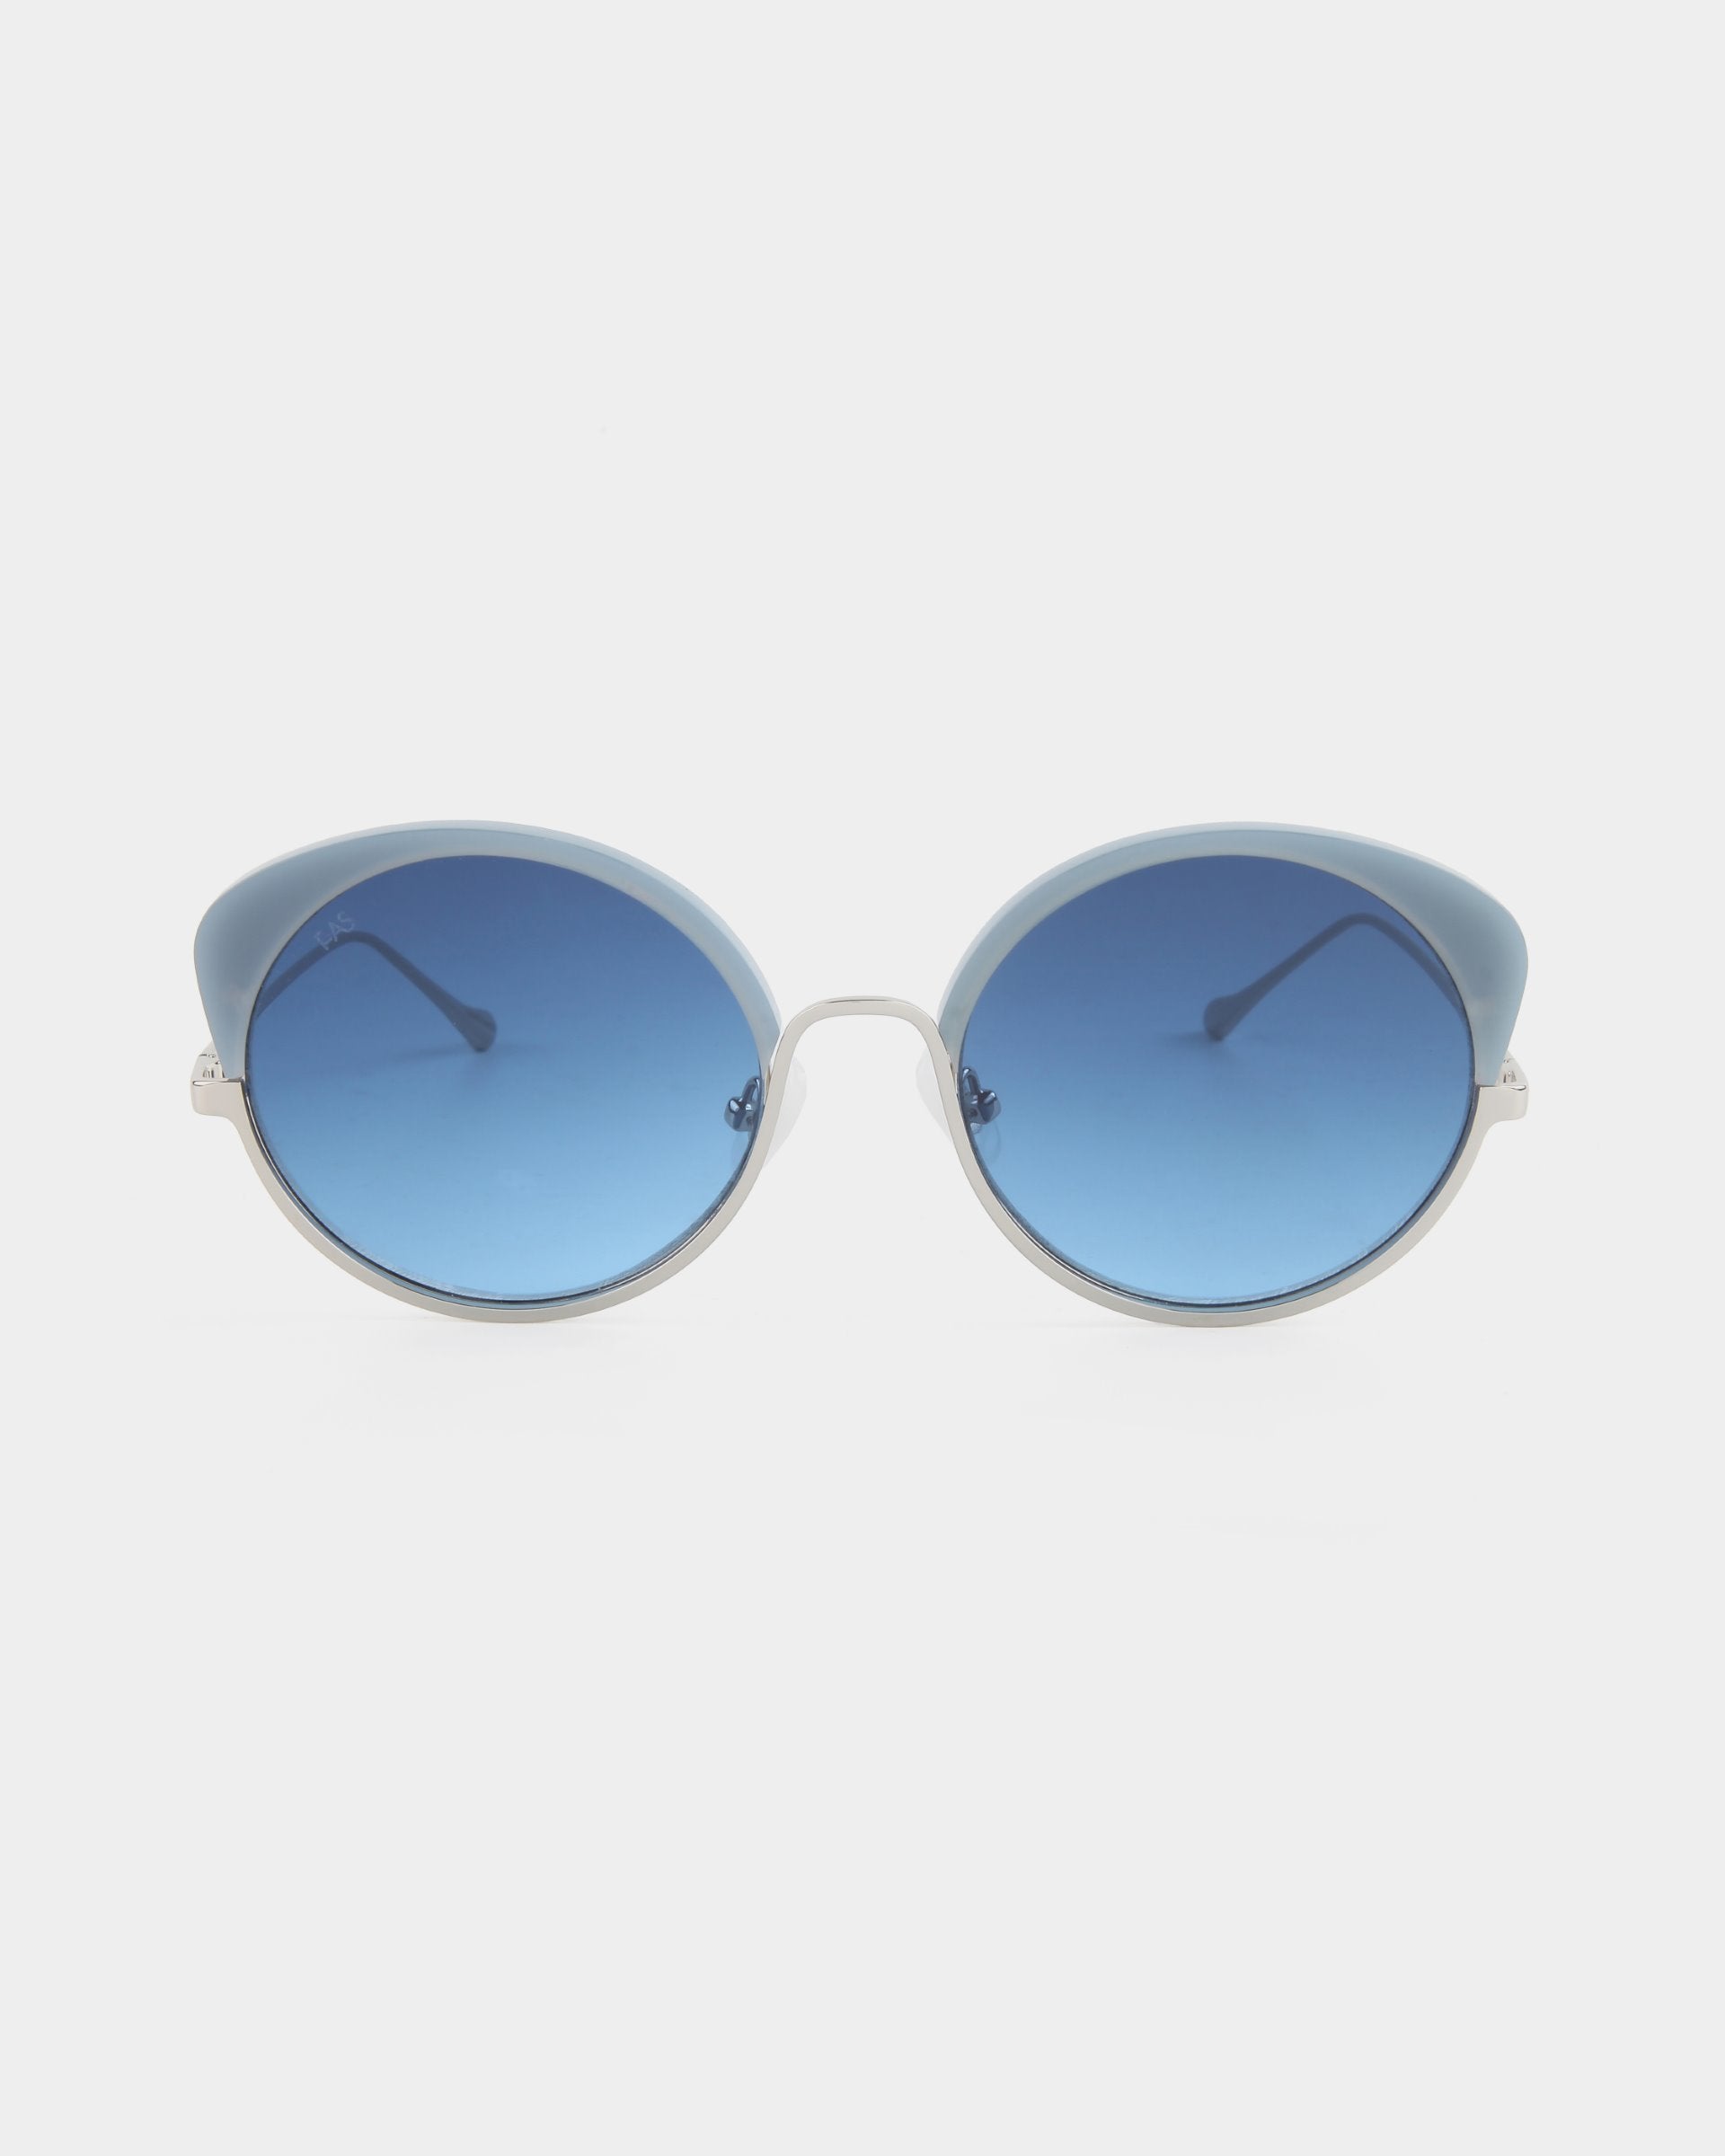 A pair of round, blue-tinted Cocoon sunglasses by For Art's Sake® with thin metallic frames and light blue to clear gradient lenses, viewed from the front against a plain white background. This handcrafted eyewear not only exudes elegance but also offers UV protection for your eyes.